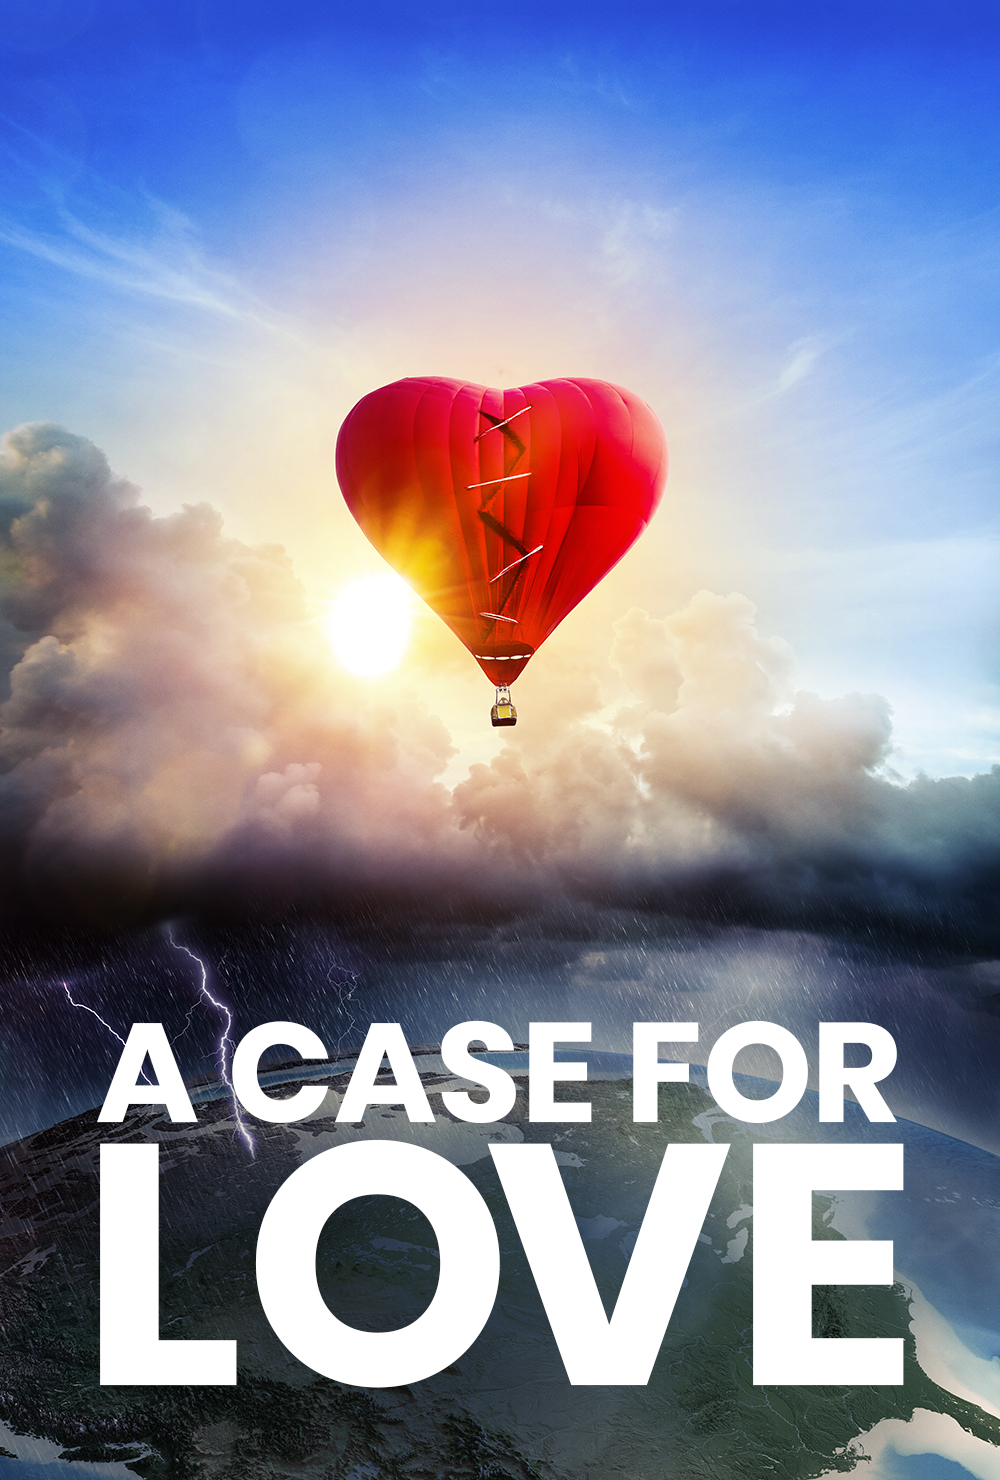 Can Unselfish Love Heal Our Country? The New Film “A Case For Love” Looks to Answer That Question – in Theaters Nationwide on January 23, 2024